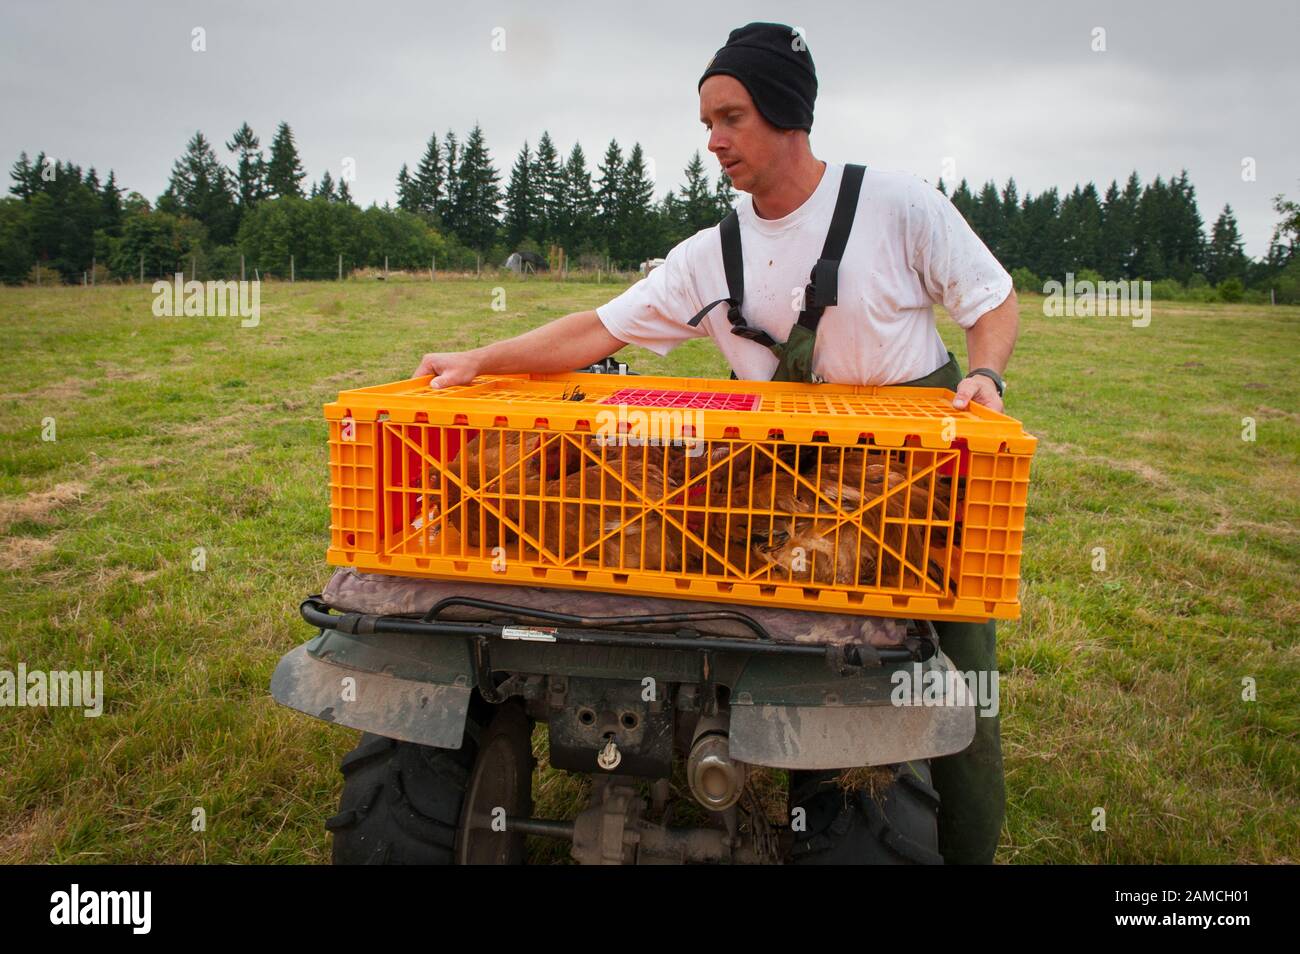 Matt Schwab chooses heritage chickens for harvest. Small family farmers Matt and Jen Schwab operate 'Inspiration Plantation' an organic farm outside of Ridgefield, Washington. The couple raises and harvests their own heritage chickens, and seasonally inviting their customers in the community to visit their farm and help with the poultry harvest. Once the birds are killed, they're placed in a bath of near boiling water to loosen the feathers and then rotated in a washing machine-like tub with rubber appendages that pull the feathers out. Visiting helpers can participate in every step of the pro Stock Photo